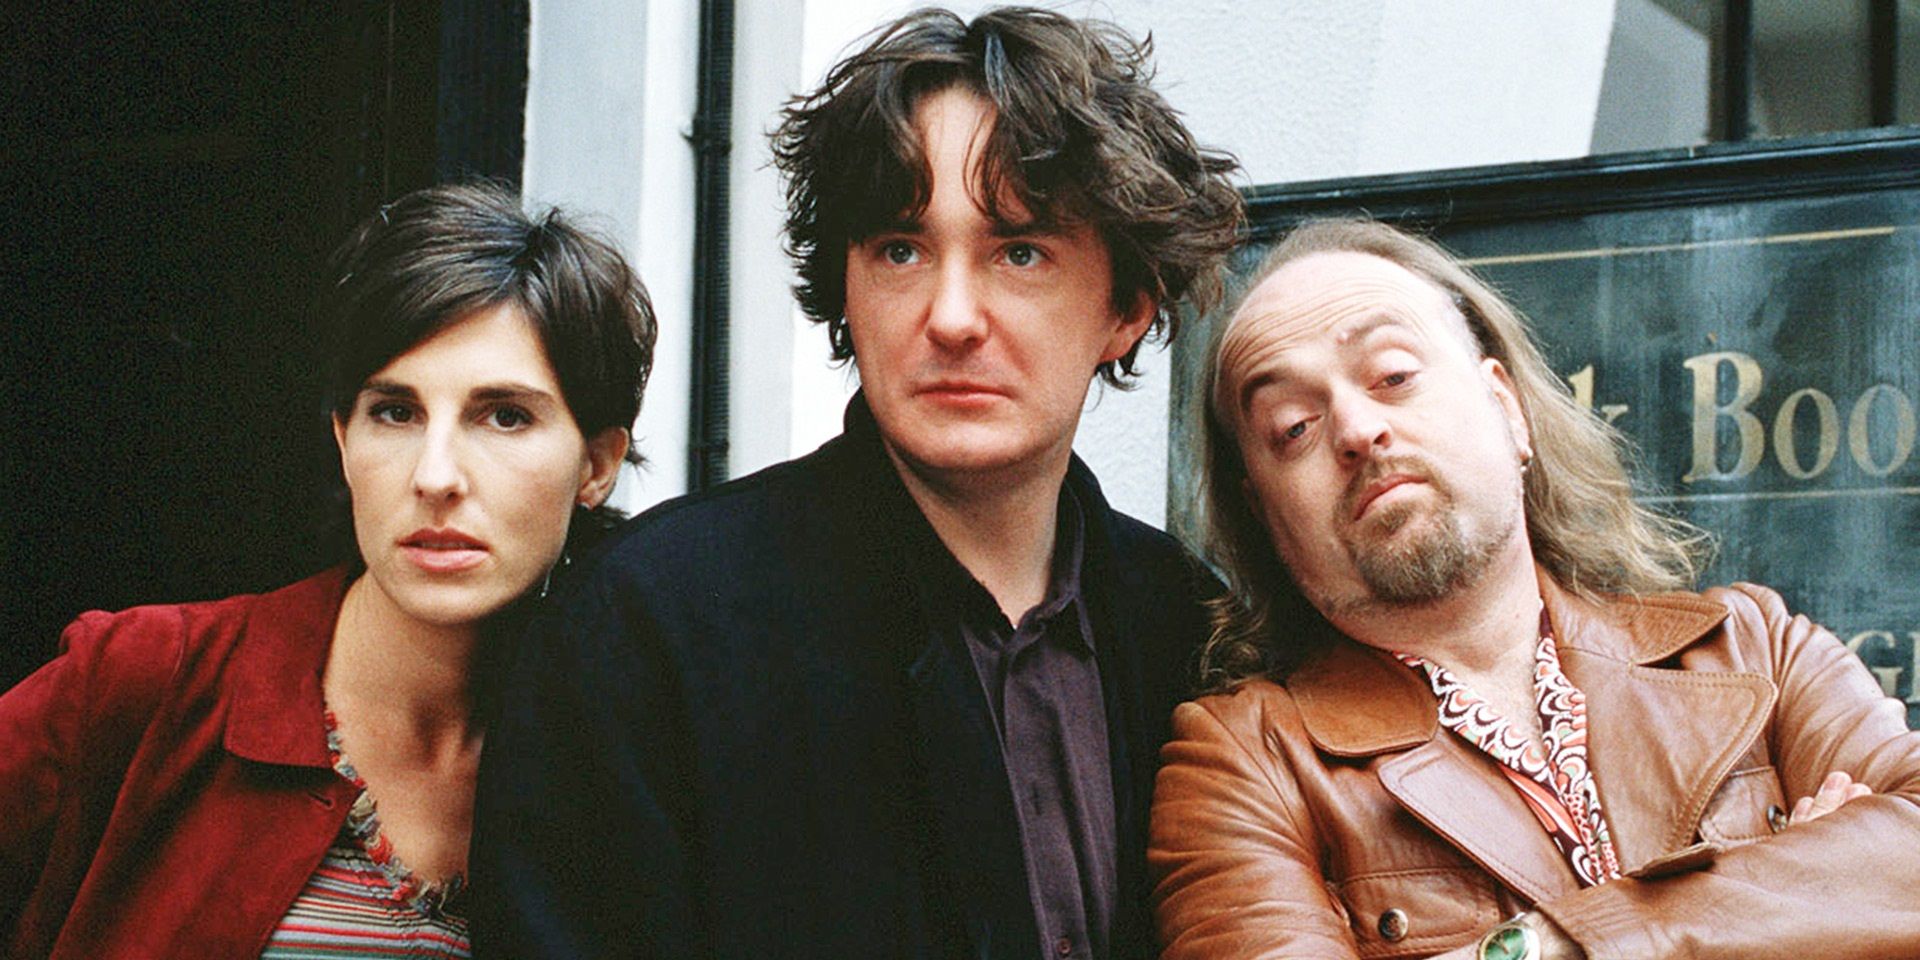 Bernard, Manny, and Fran standing outside the bookshop in Black Books